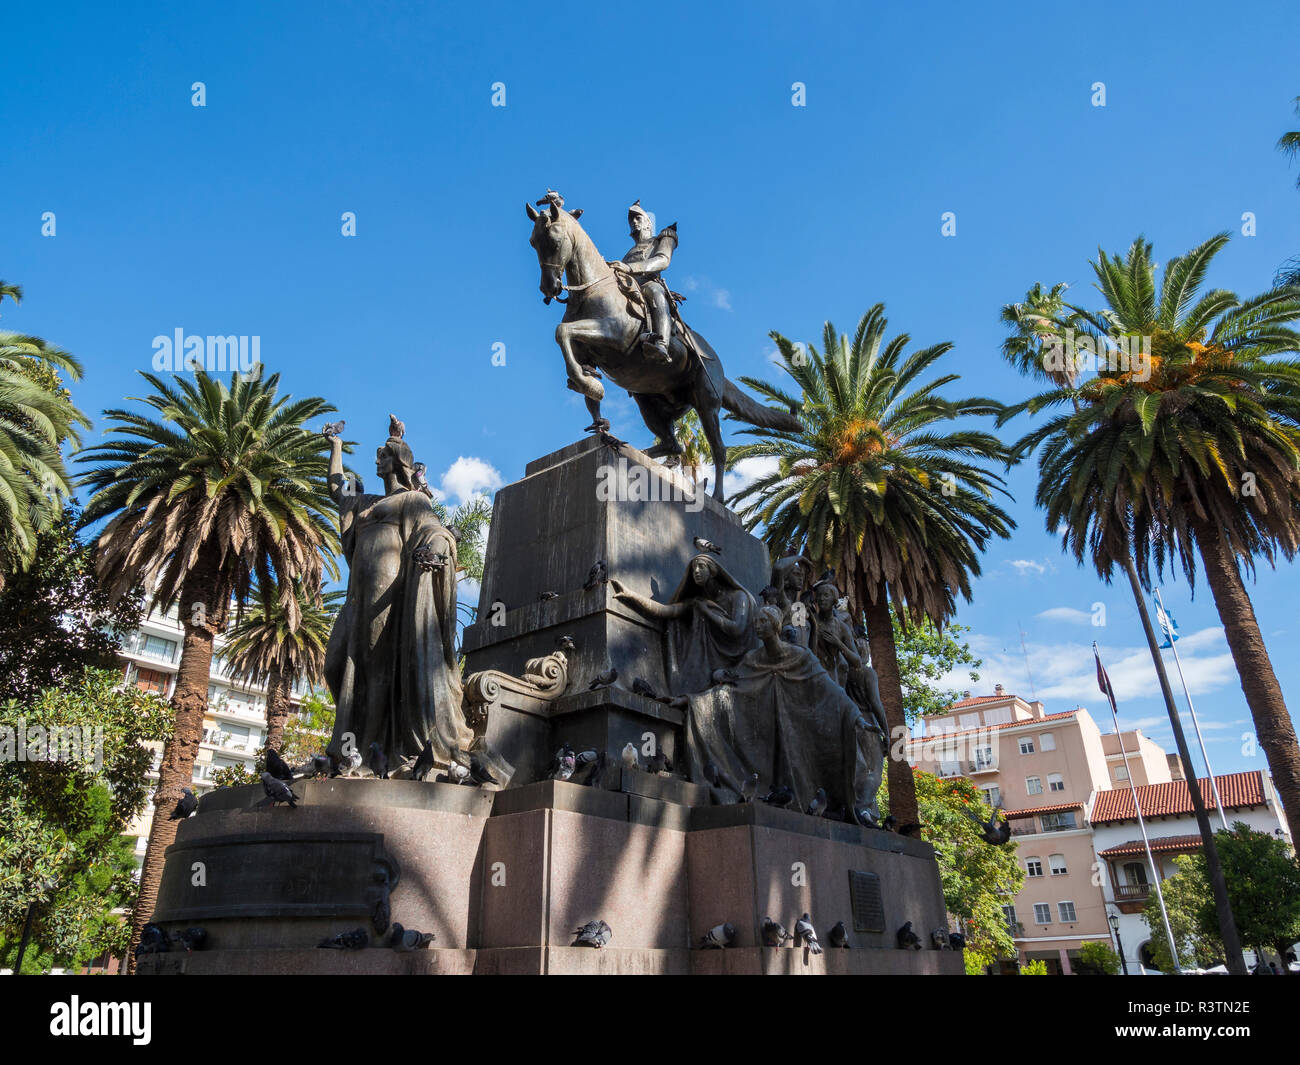 Plaza 9 de Julio, monument commemorating General Jose de Arenales Town of Salta, located in the foothills of the Andes. Argentina, South America. Stock Photo